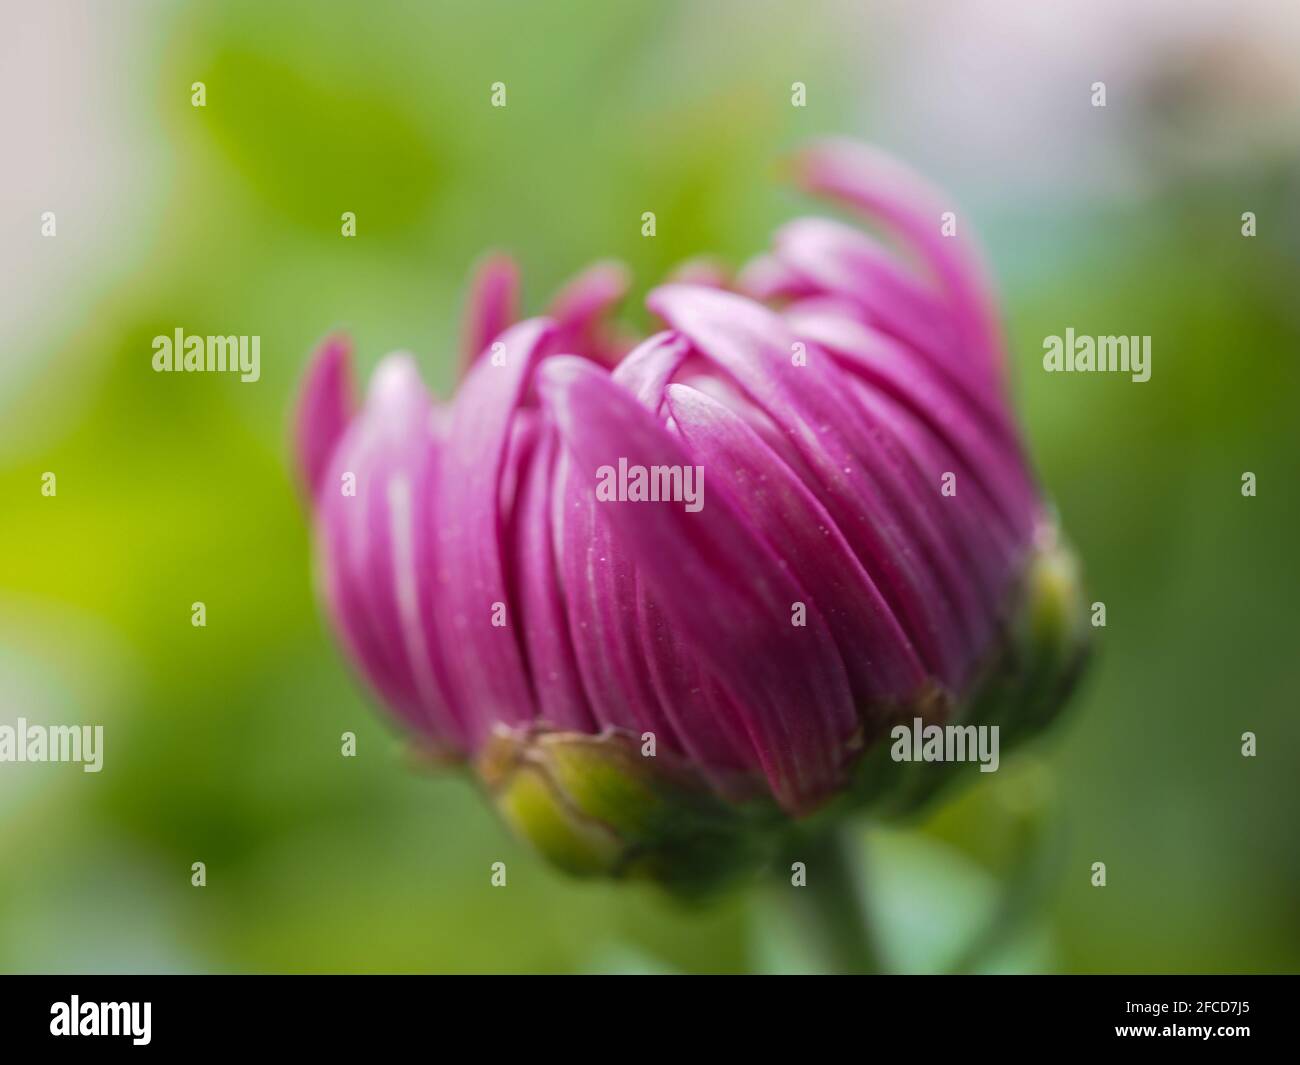 Macro of a Magenta Pink Chrysanthemum flower bud opening, on a blurred green foliage background. From the side perspective, in the garden Stock Photo